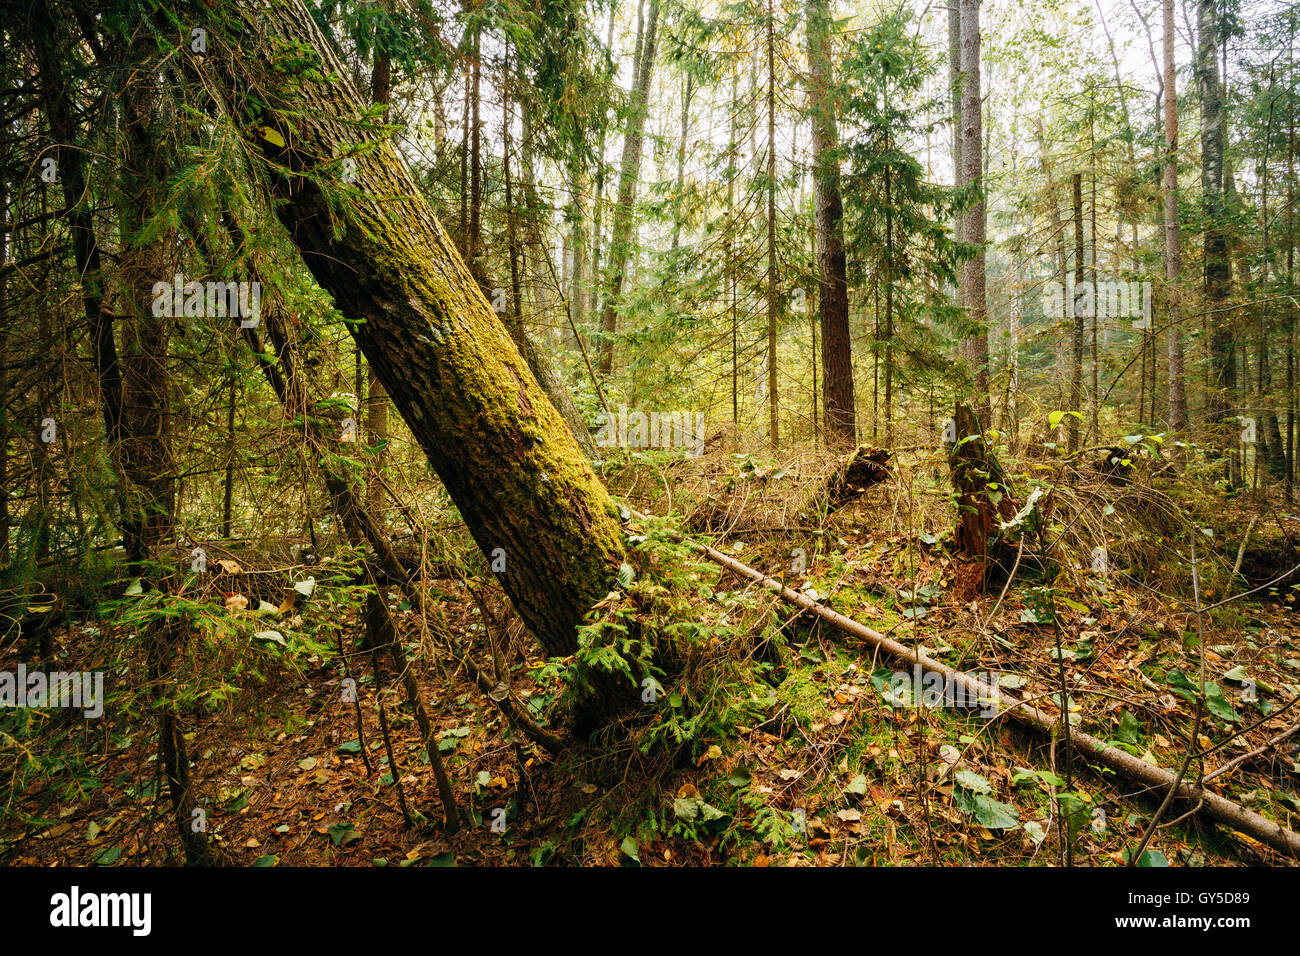 Wild Forest. Fallen Trees In Coniferous Forest Reserve. Stock Photo